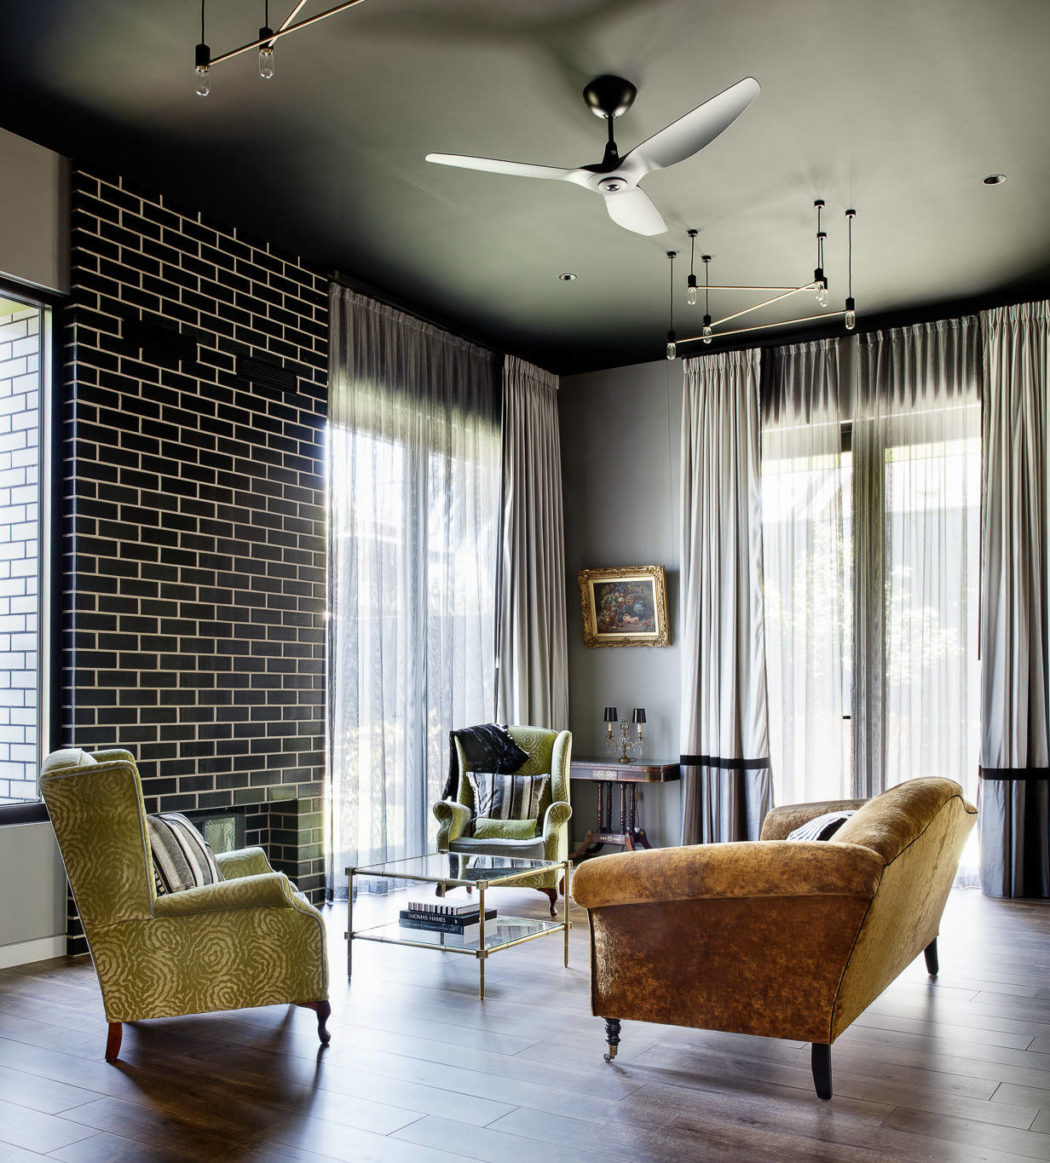 A cozy living room with a black brick wall, plush leather and velvet armchairs, and sleek modern lighting.